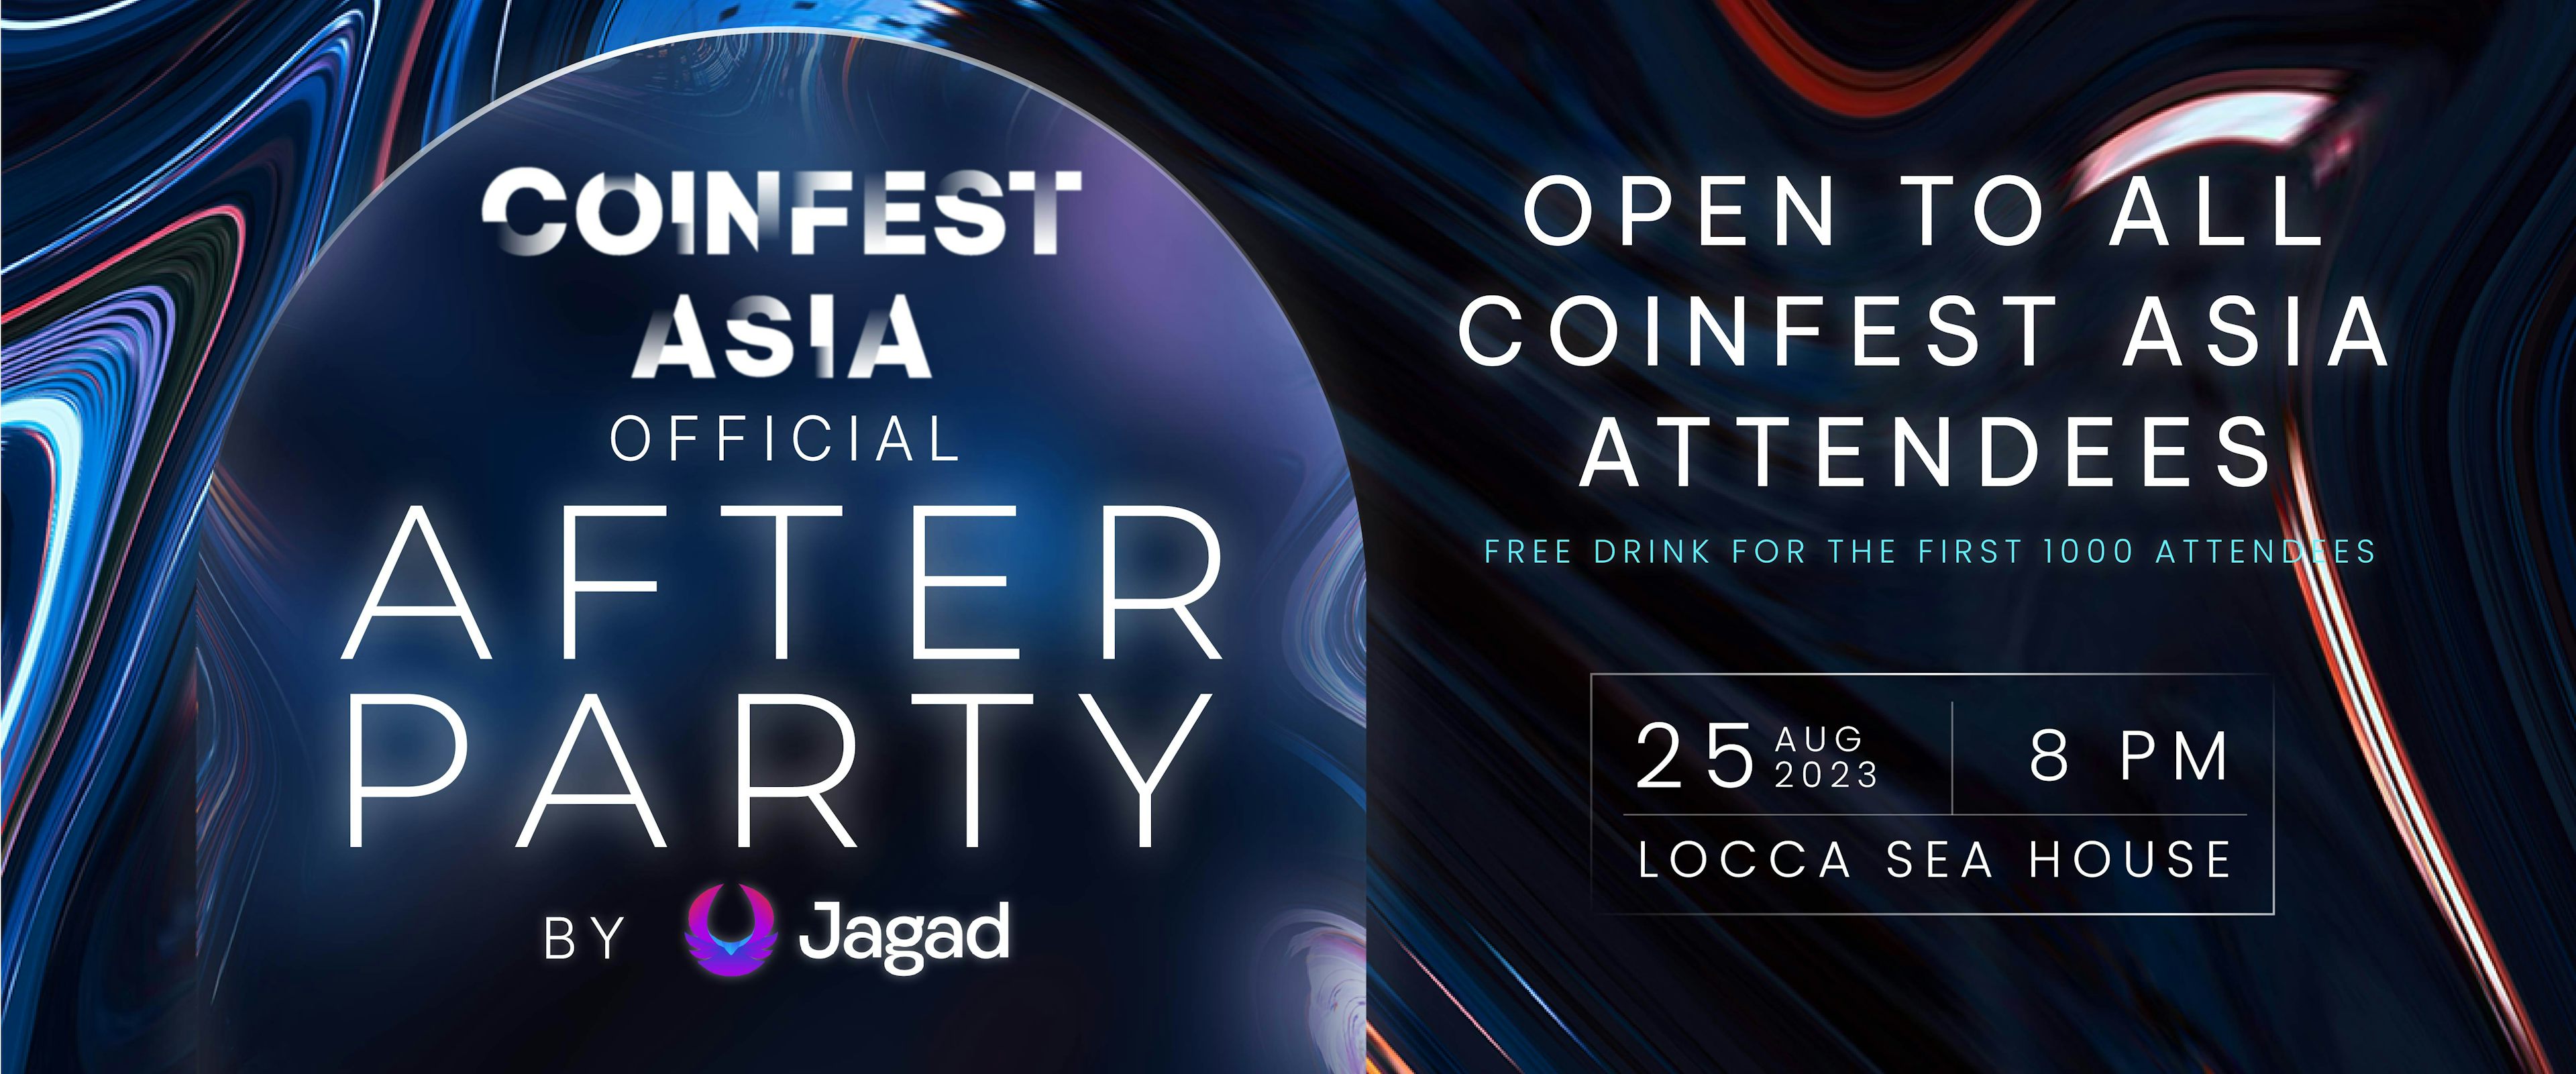 Coinfest Asia Day 2 Official After Party